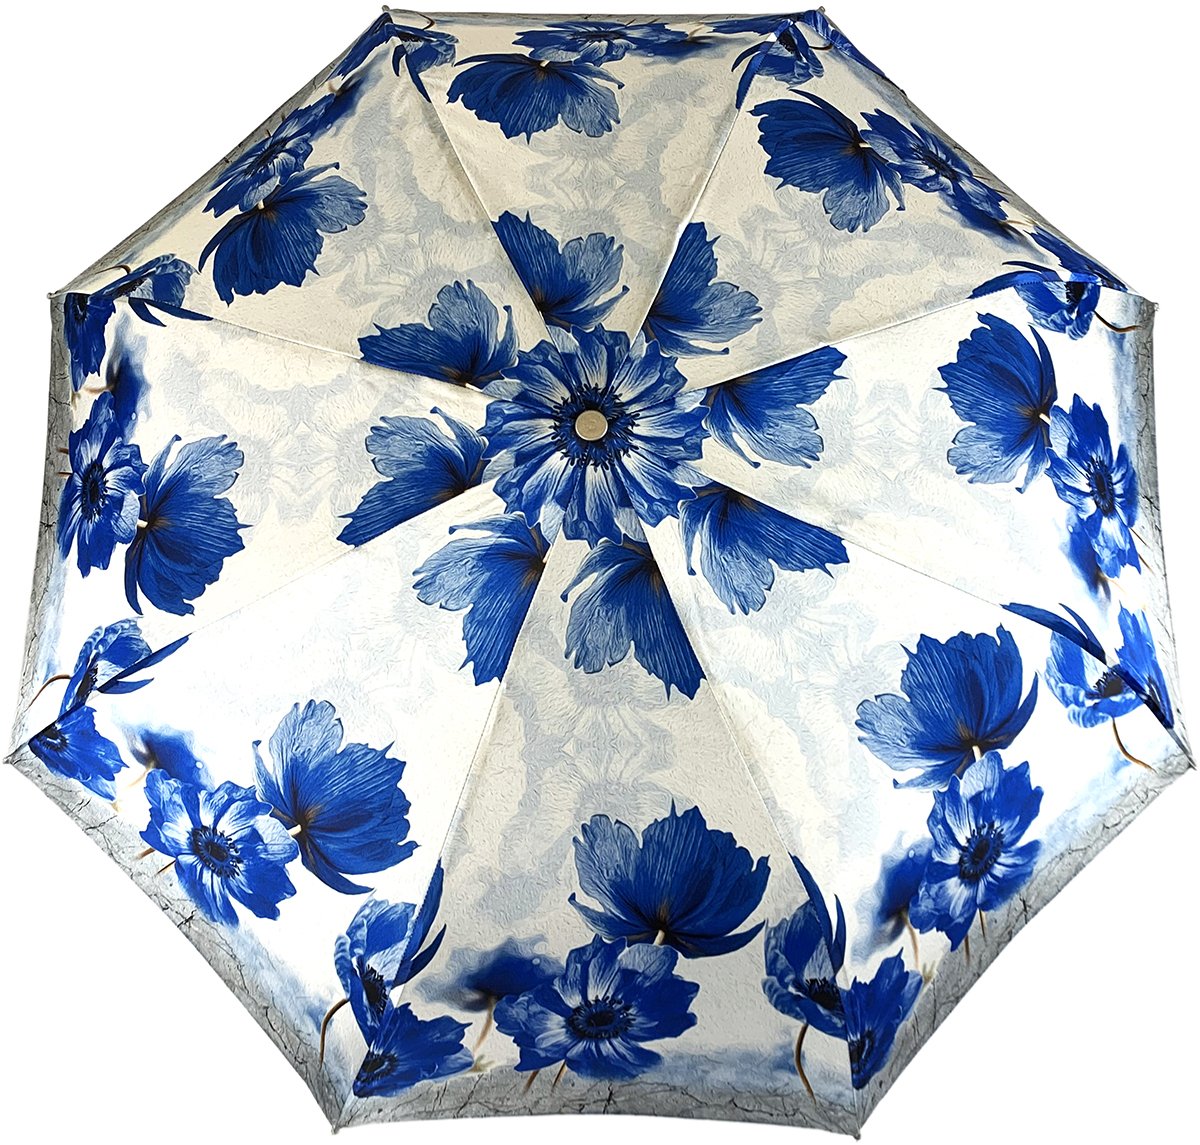 Beautiful Folding Umbrella With Blue Poppies - IL MARCHESATO LUXURY UMBRELLAS, CANES AND SHOEHORNS